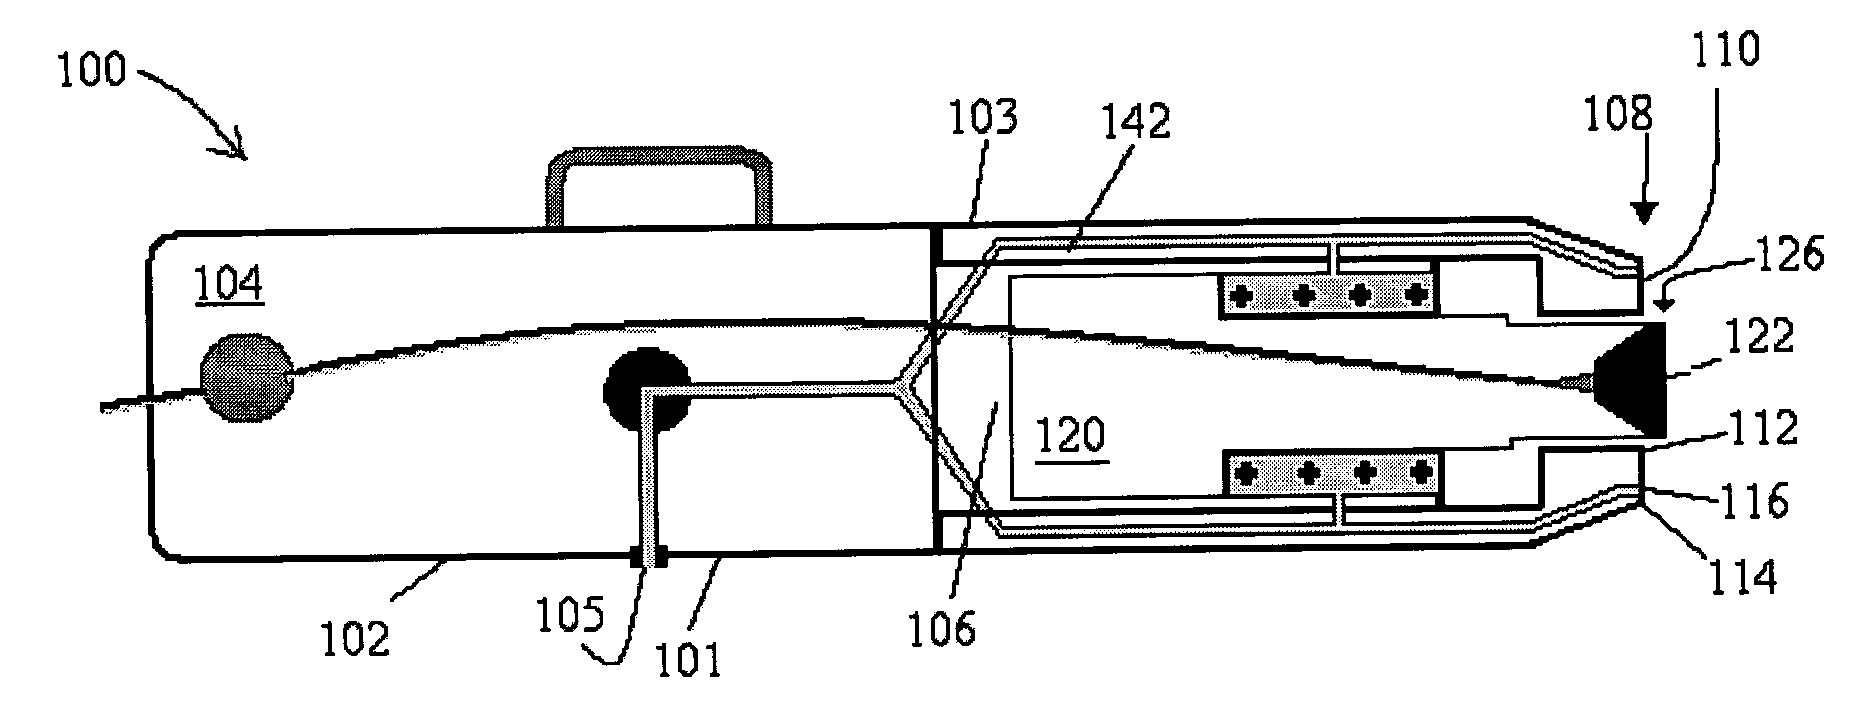 Device for forming an effective sensor-to-tissue contact